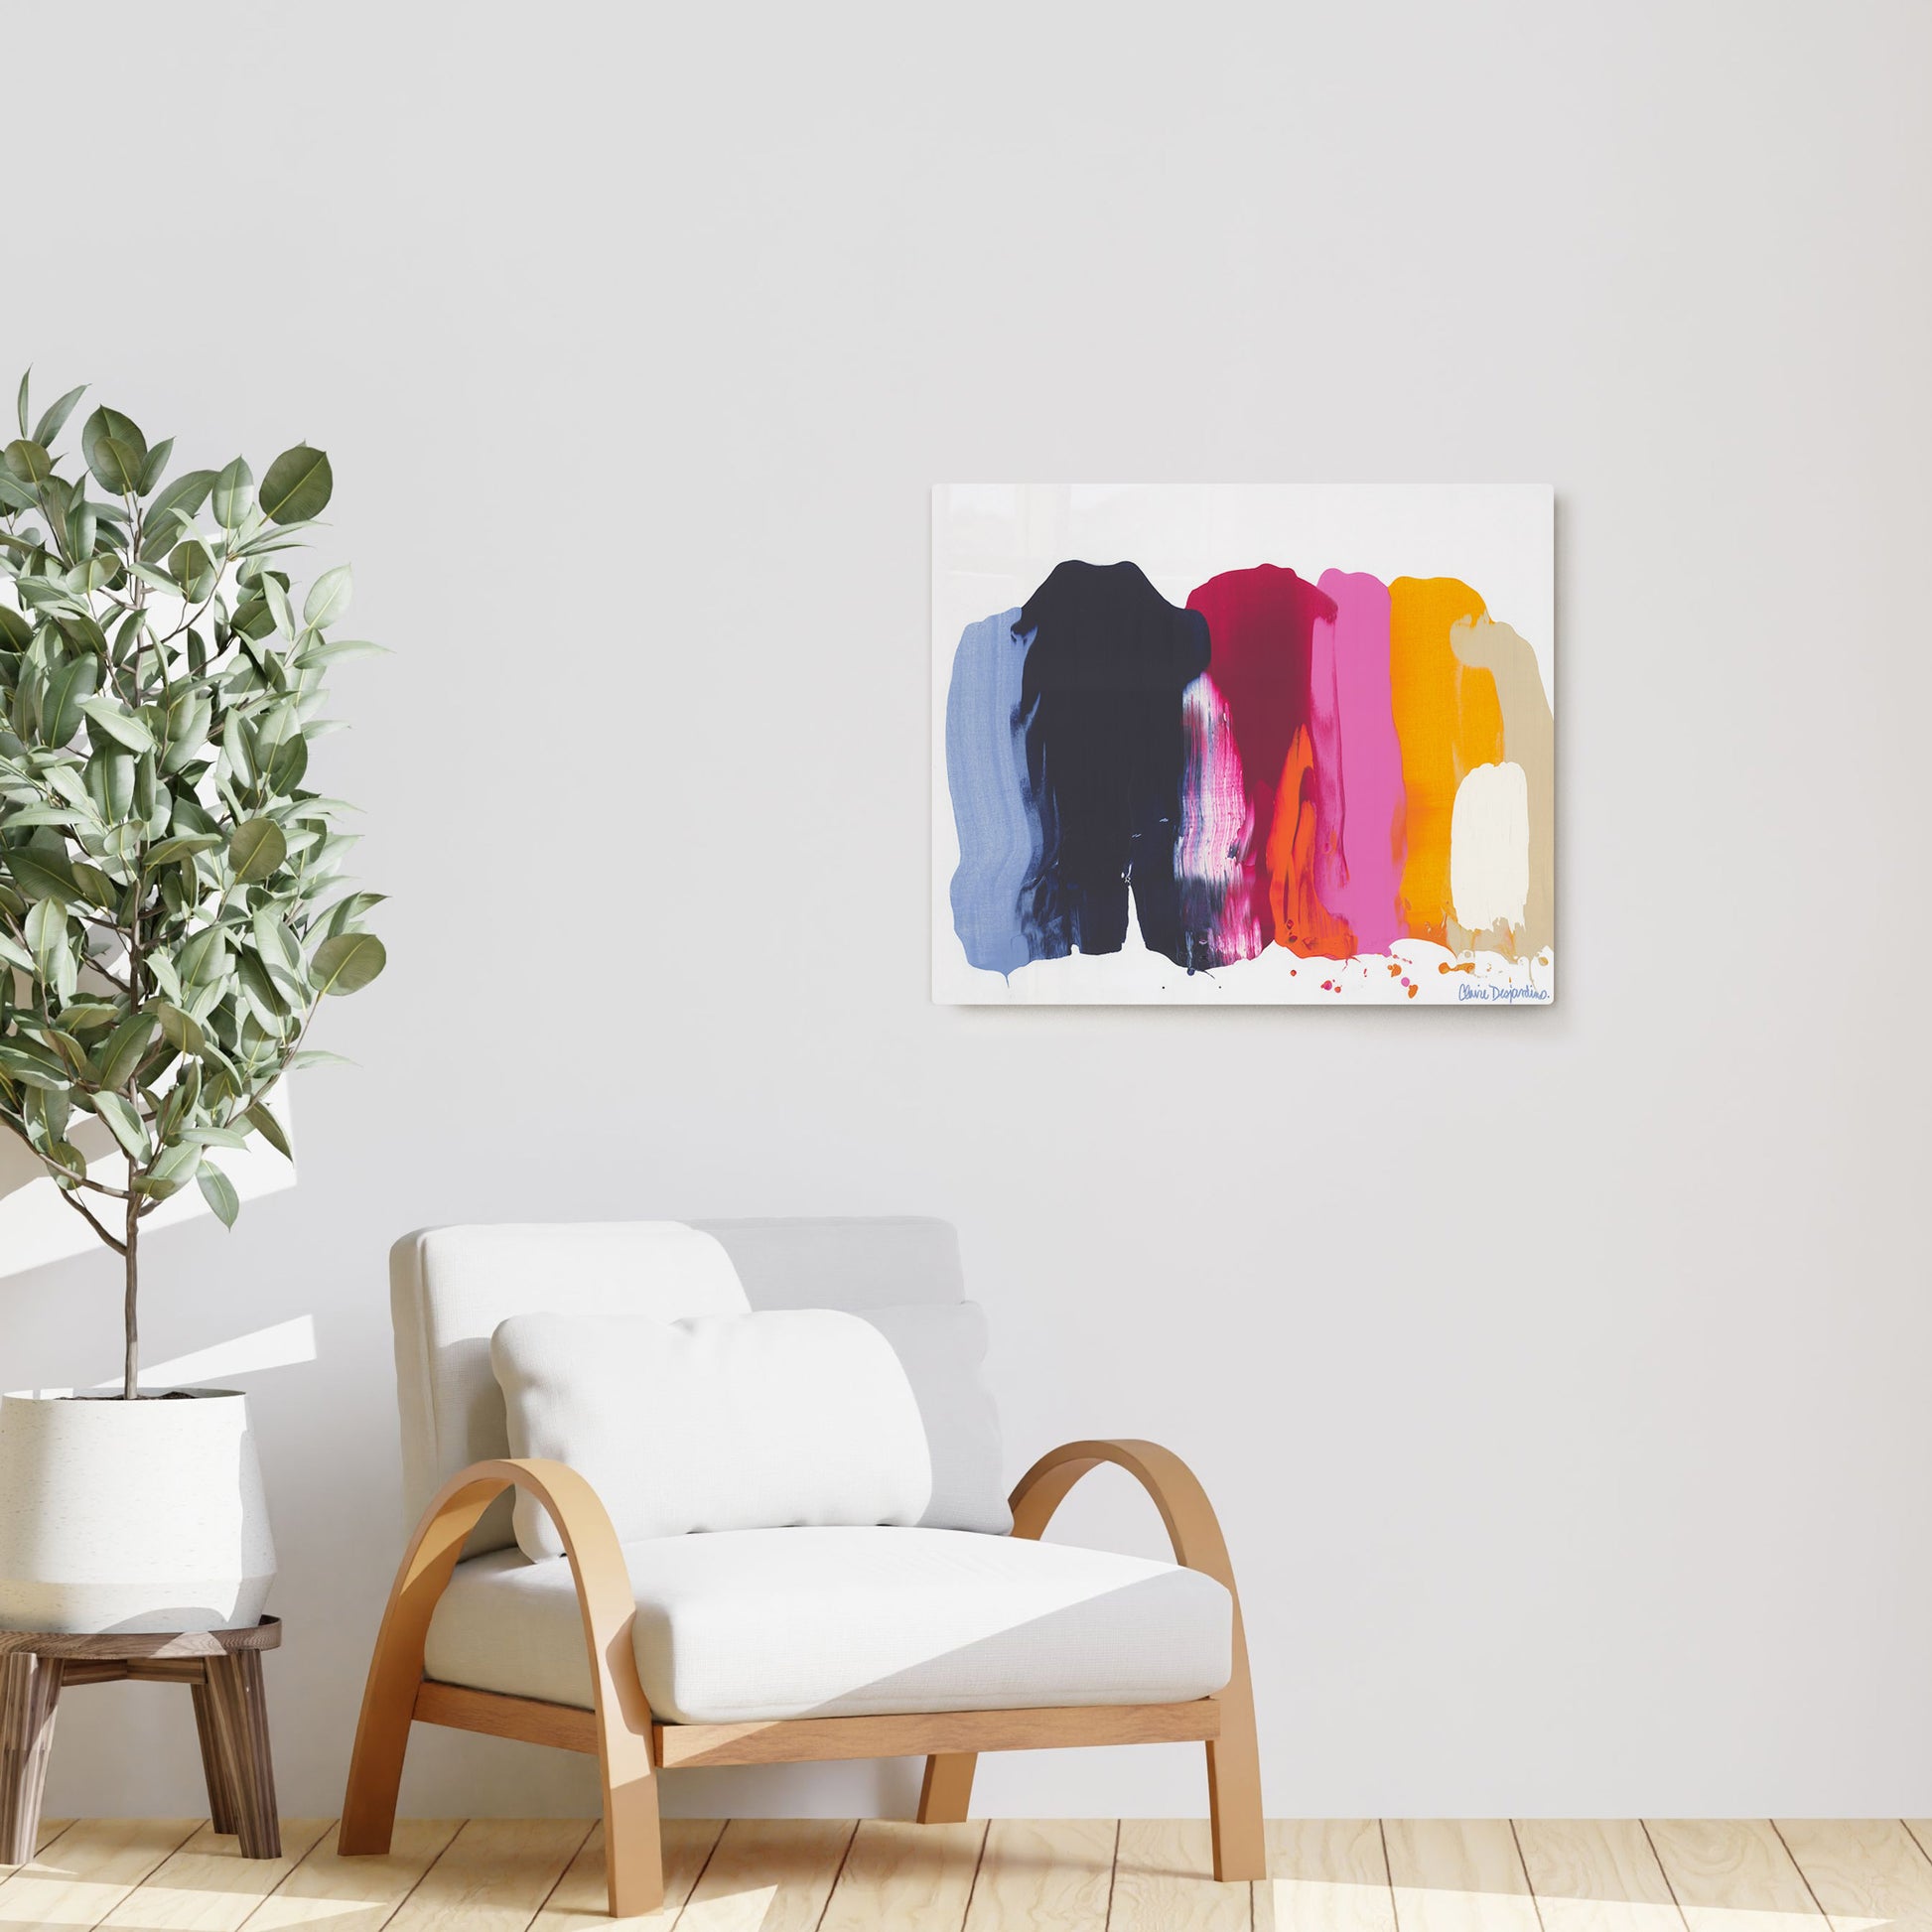 Claire Desjardins' Love 02 painting reproduced on HD metal print and displayed on wall